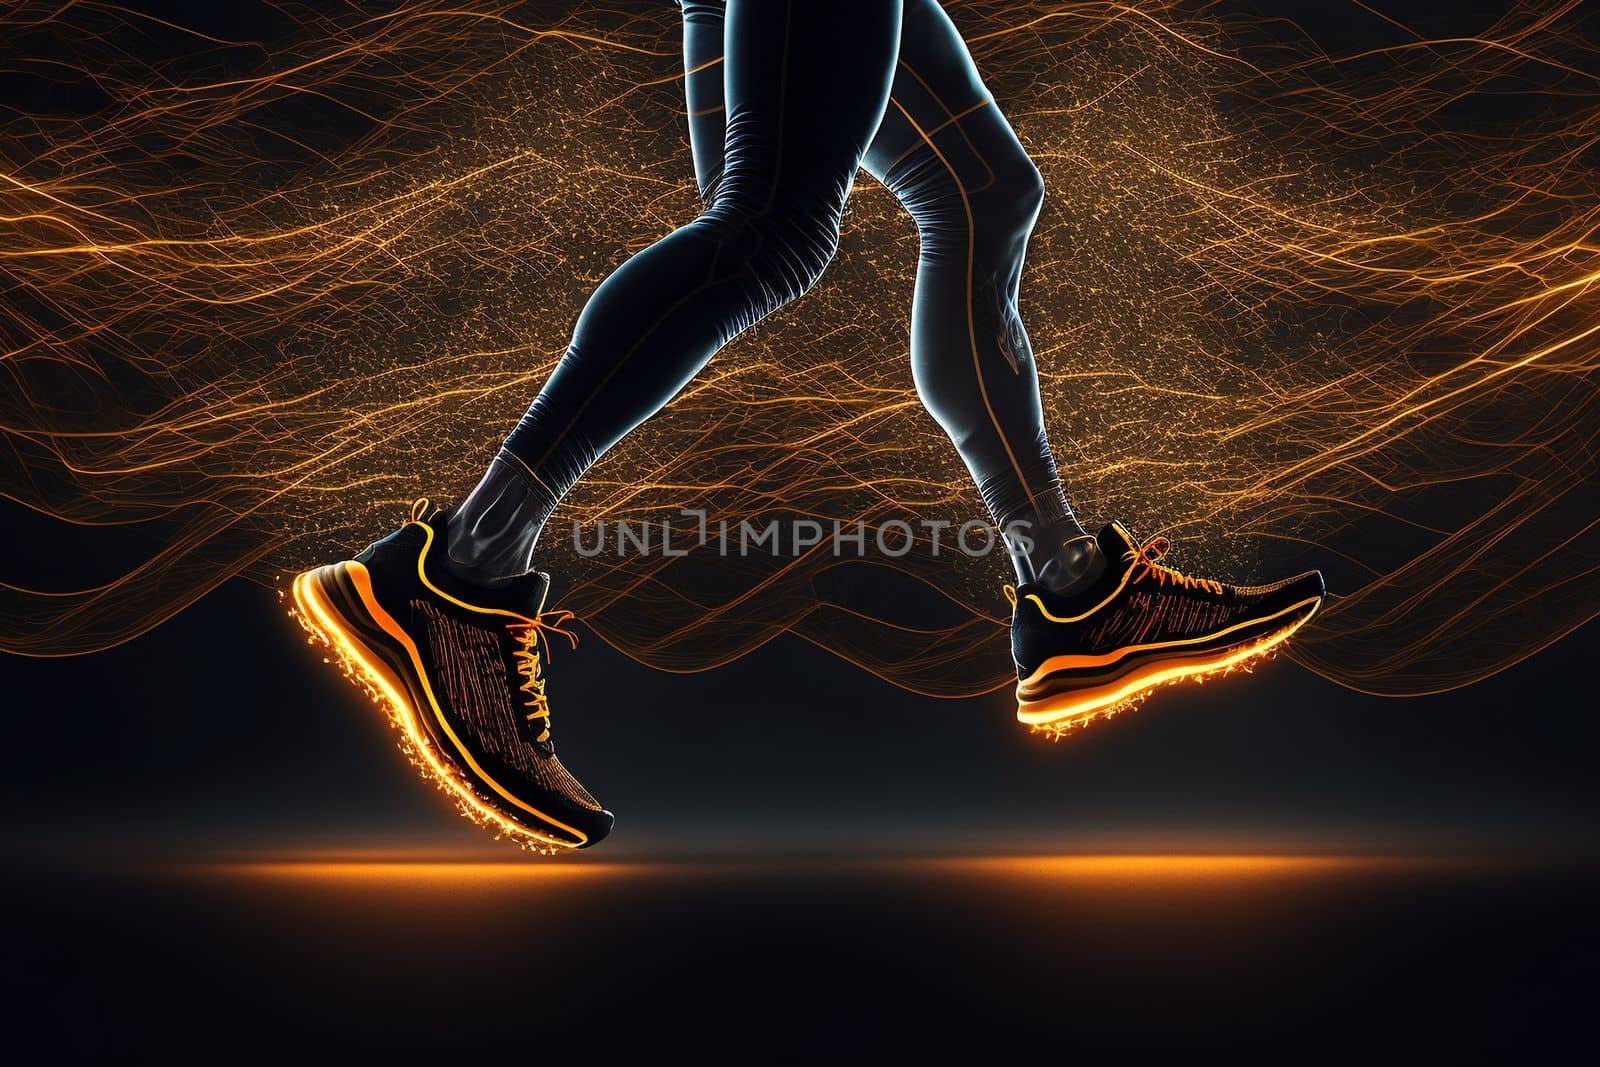 earn. NFT Sneakers. Woman running and earning cryptocurrency. 3d illustration of the MOVE TO EARN trend in the crypto industry.